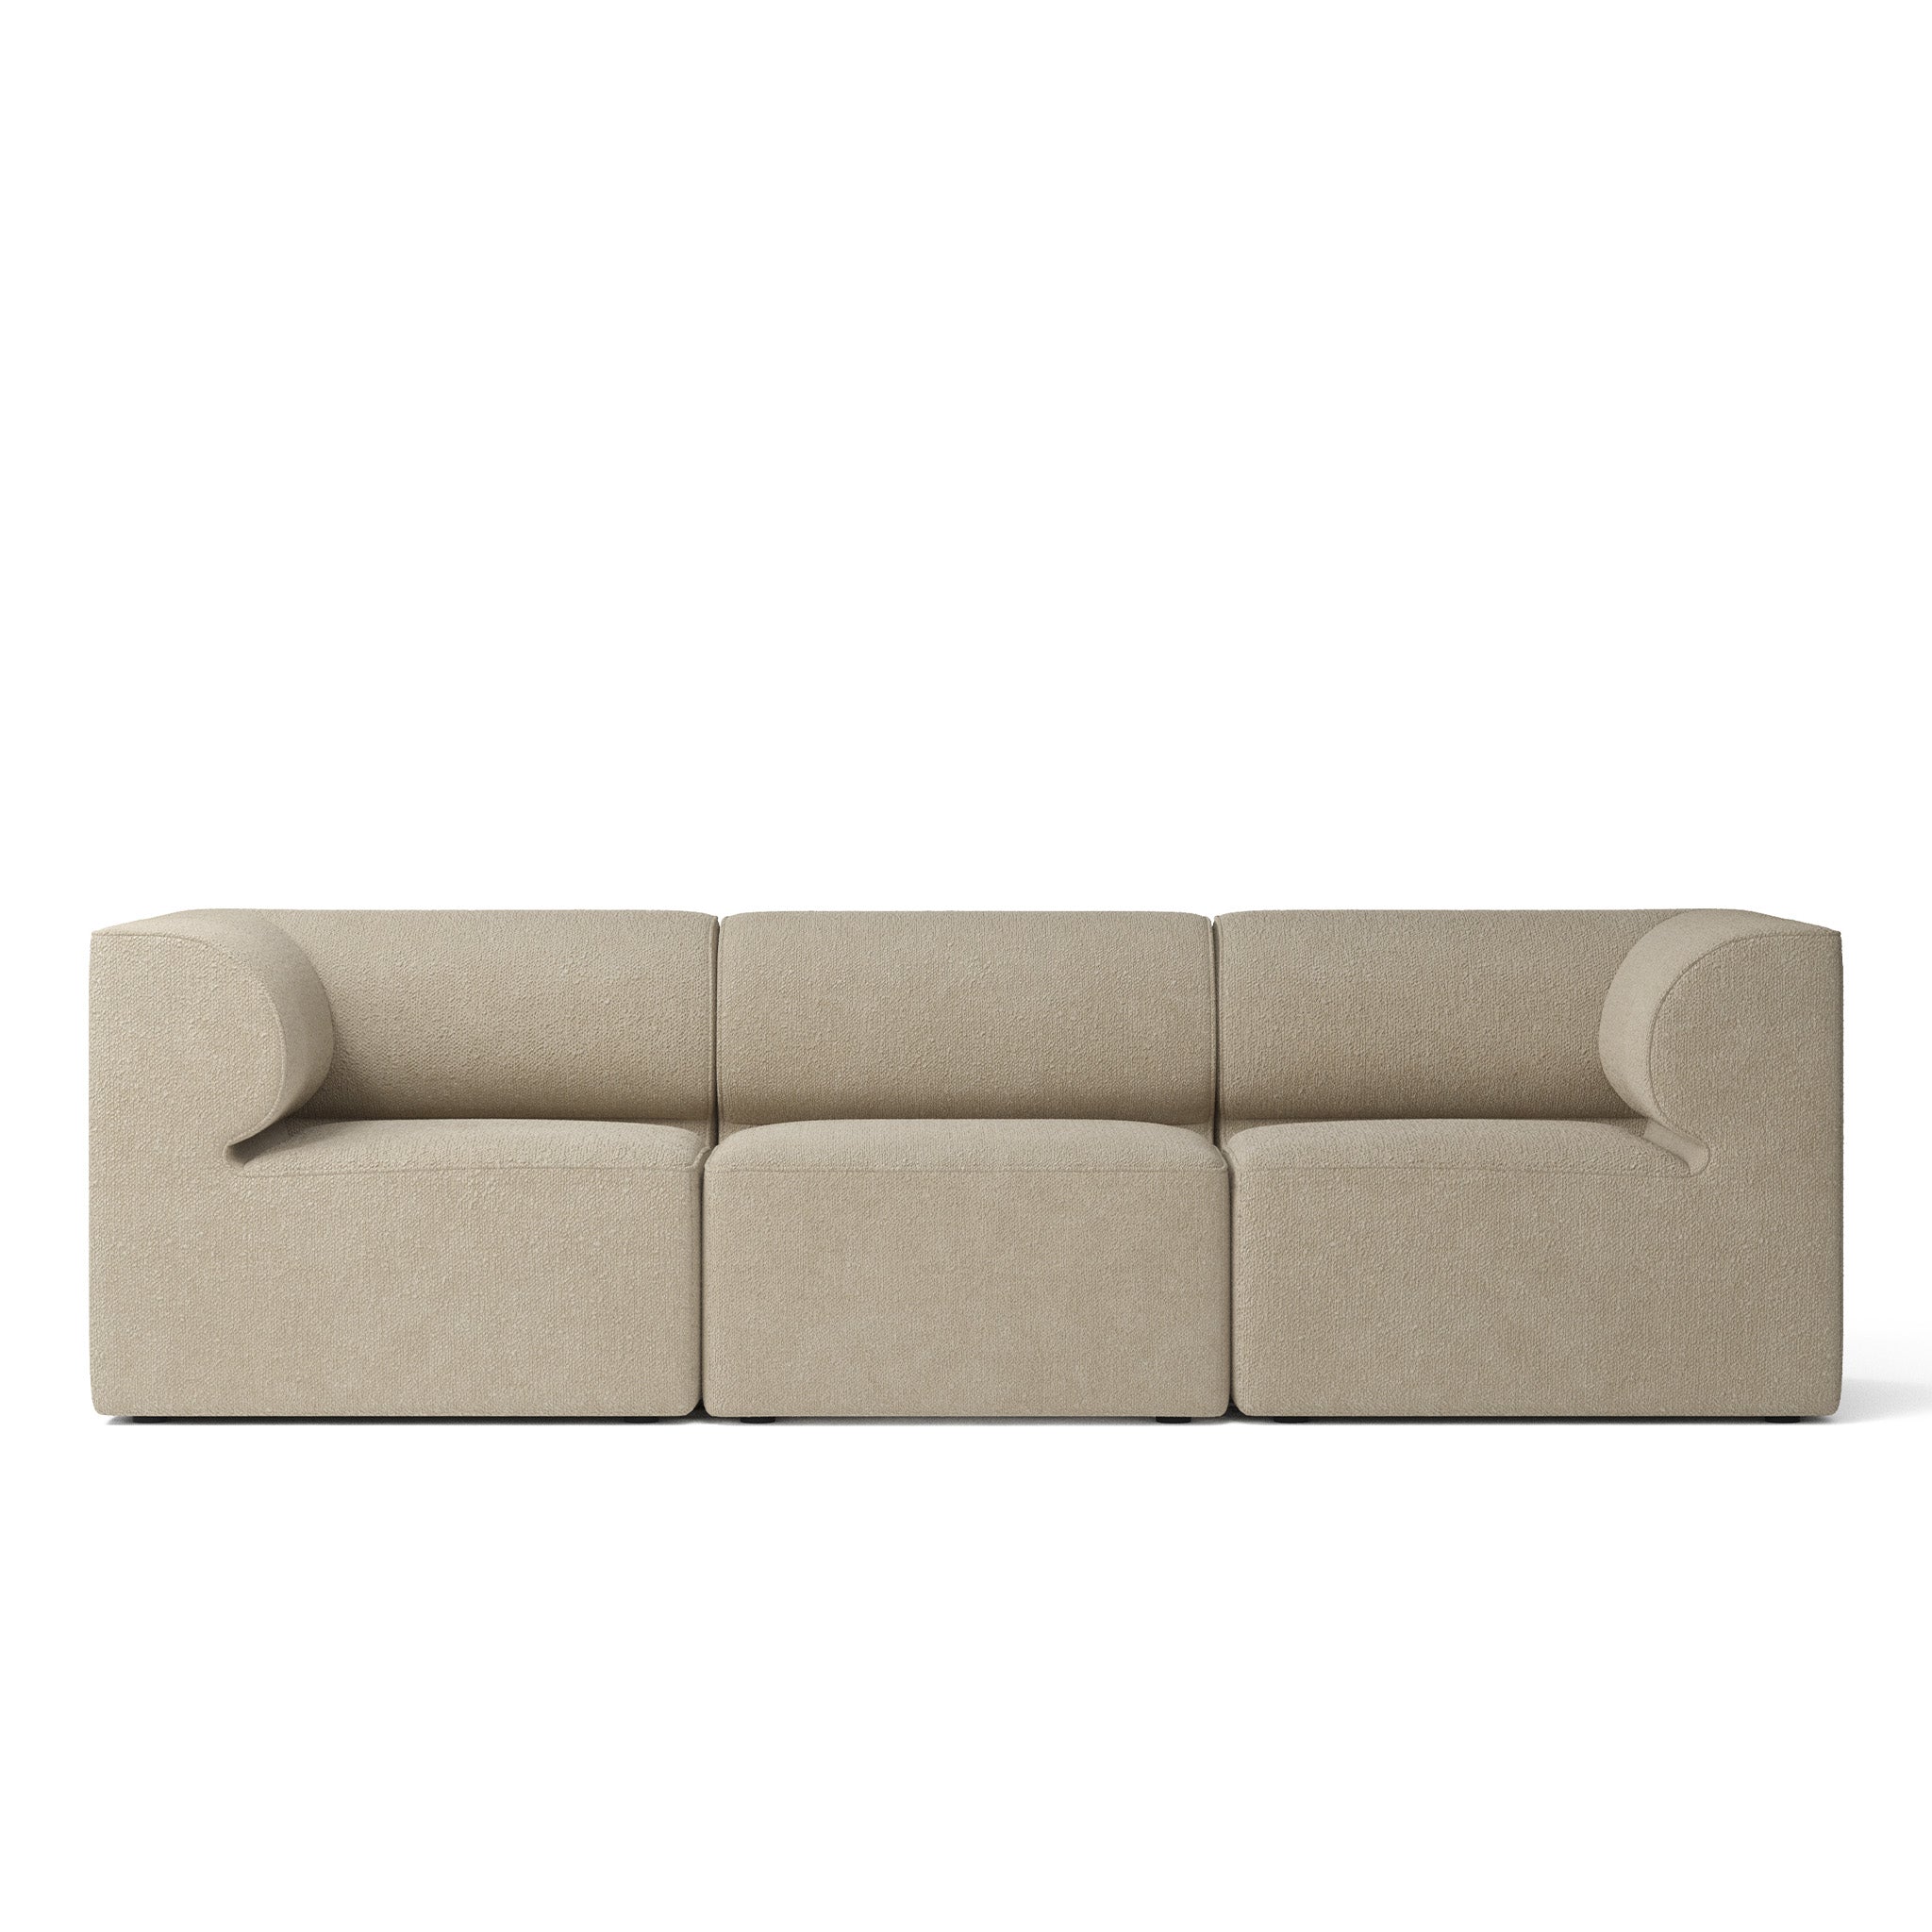 Eave 3 Seater Sofa by Norm Architects